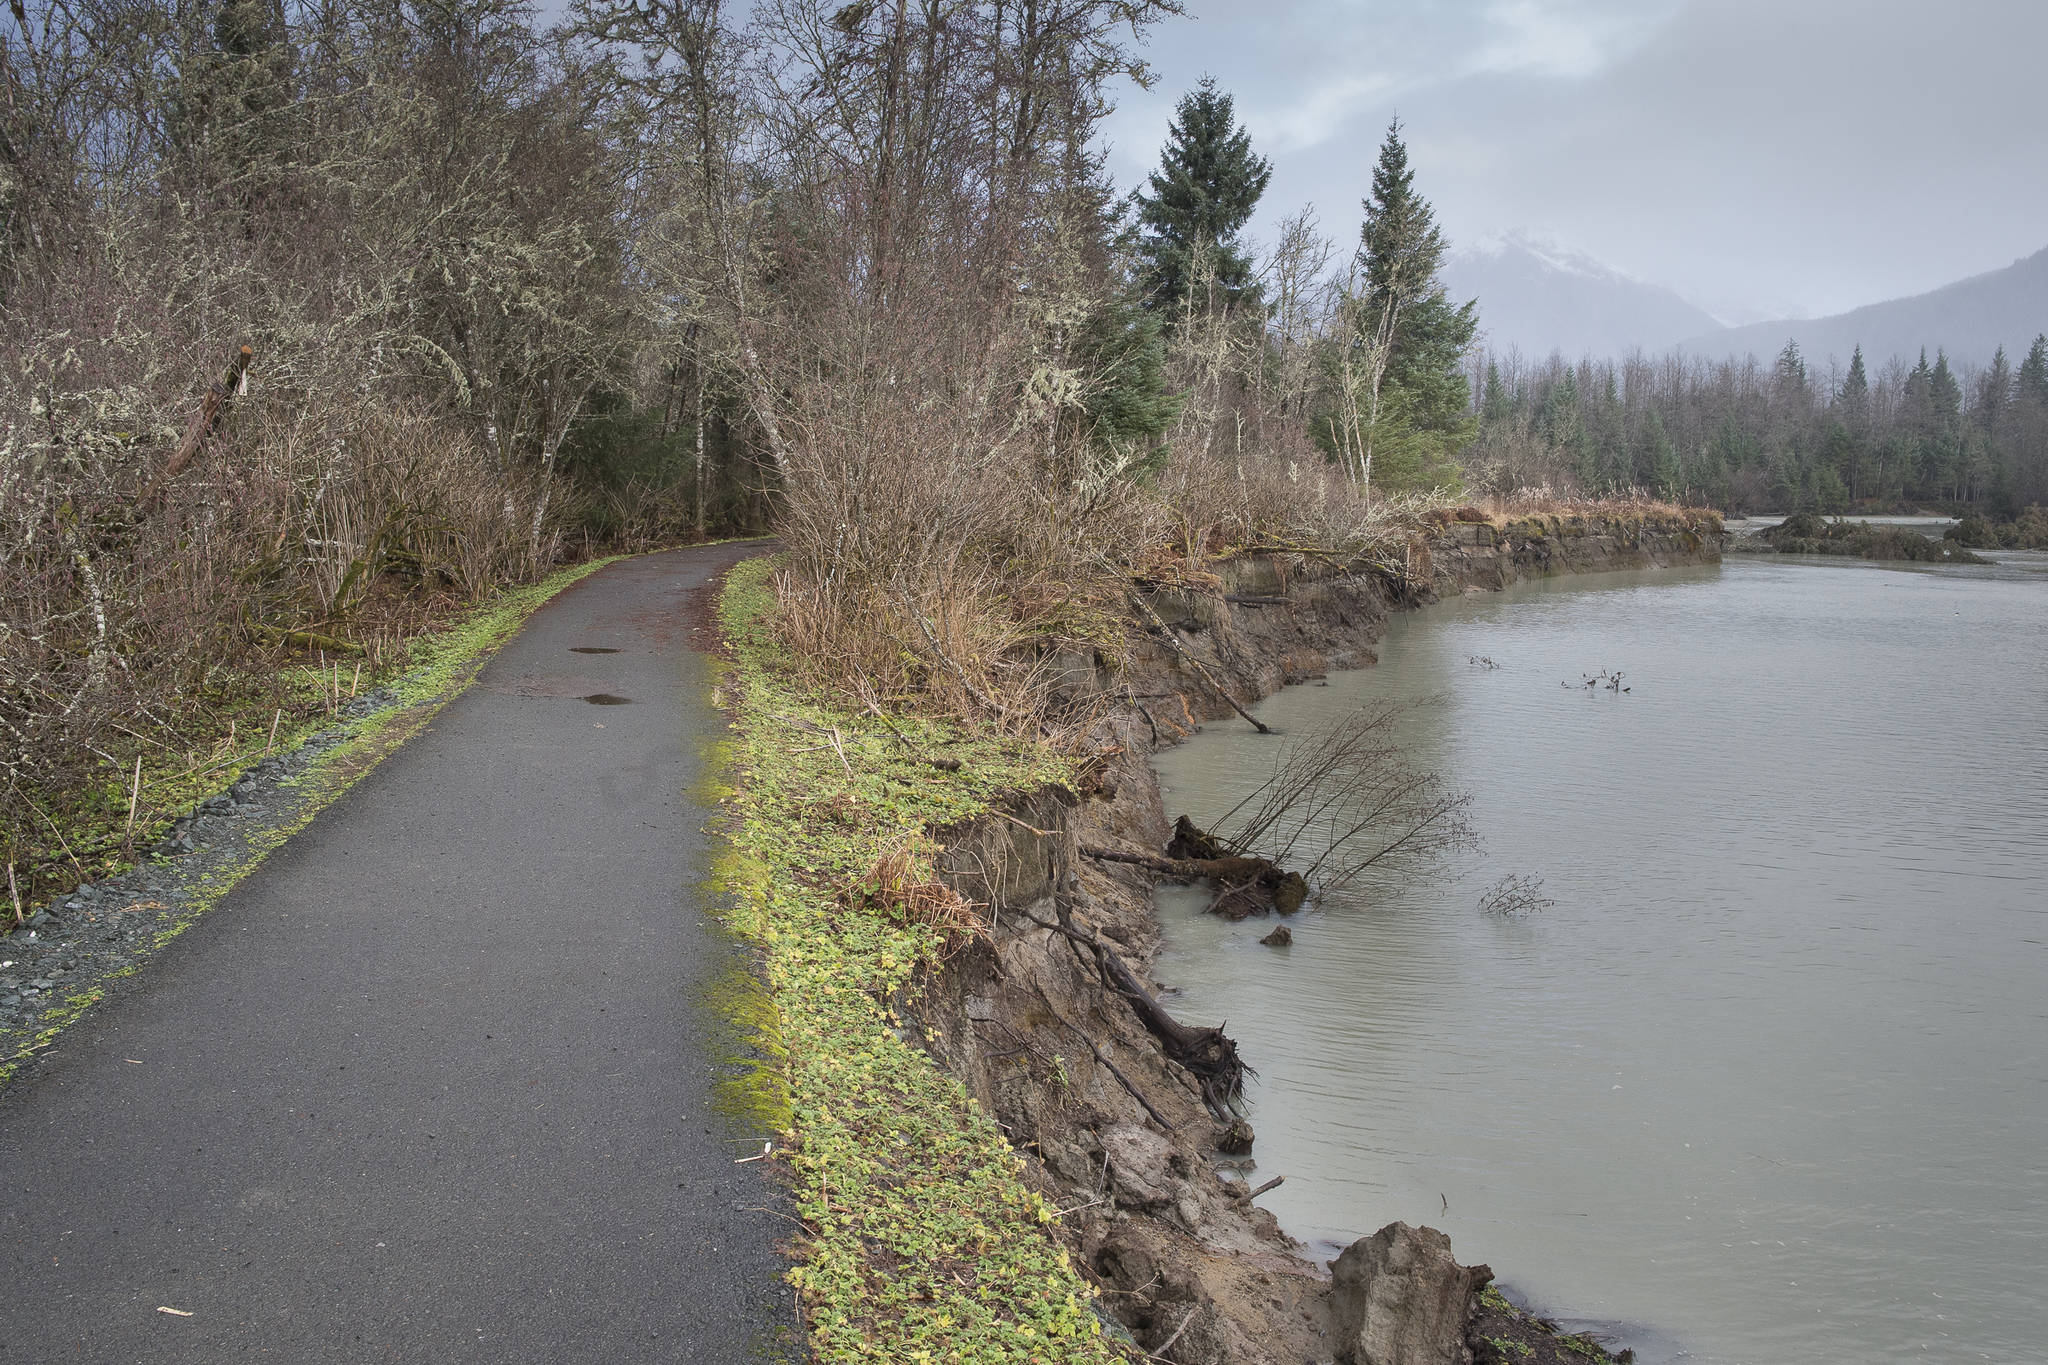 The Kaxdegoowu Heen Dei (Brotherhood Bridge) Trail is close to being eroded away by the Mendenhall River on Monday, Nov. 26, 2018. (Michael Penn | Juneau Empire)